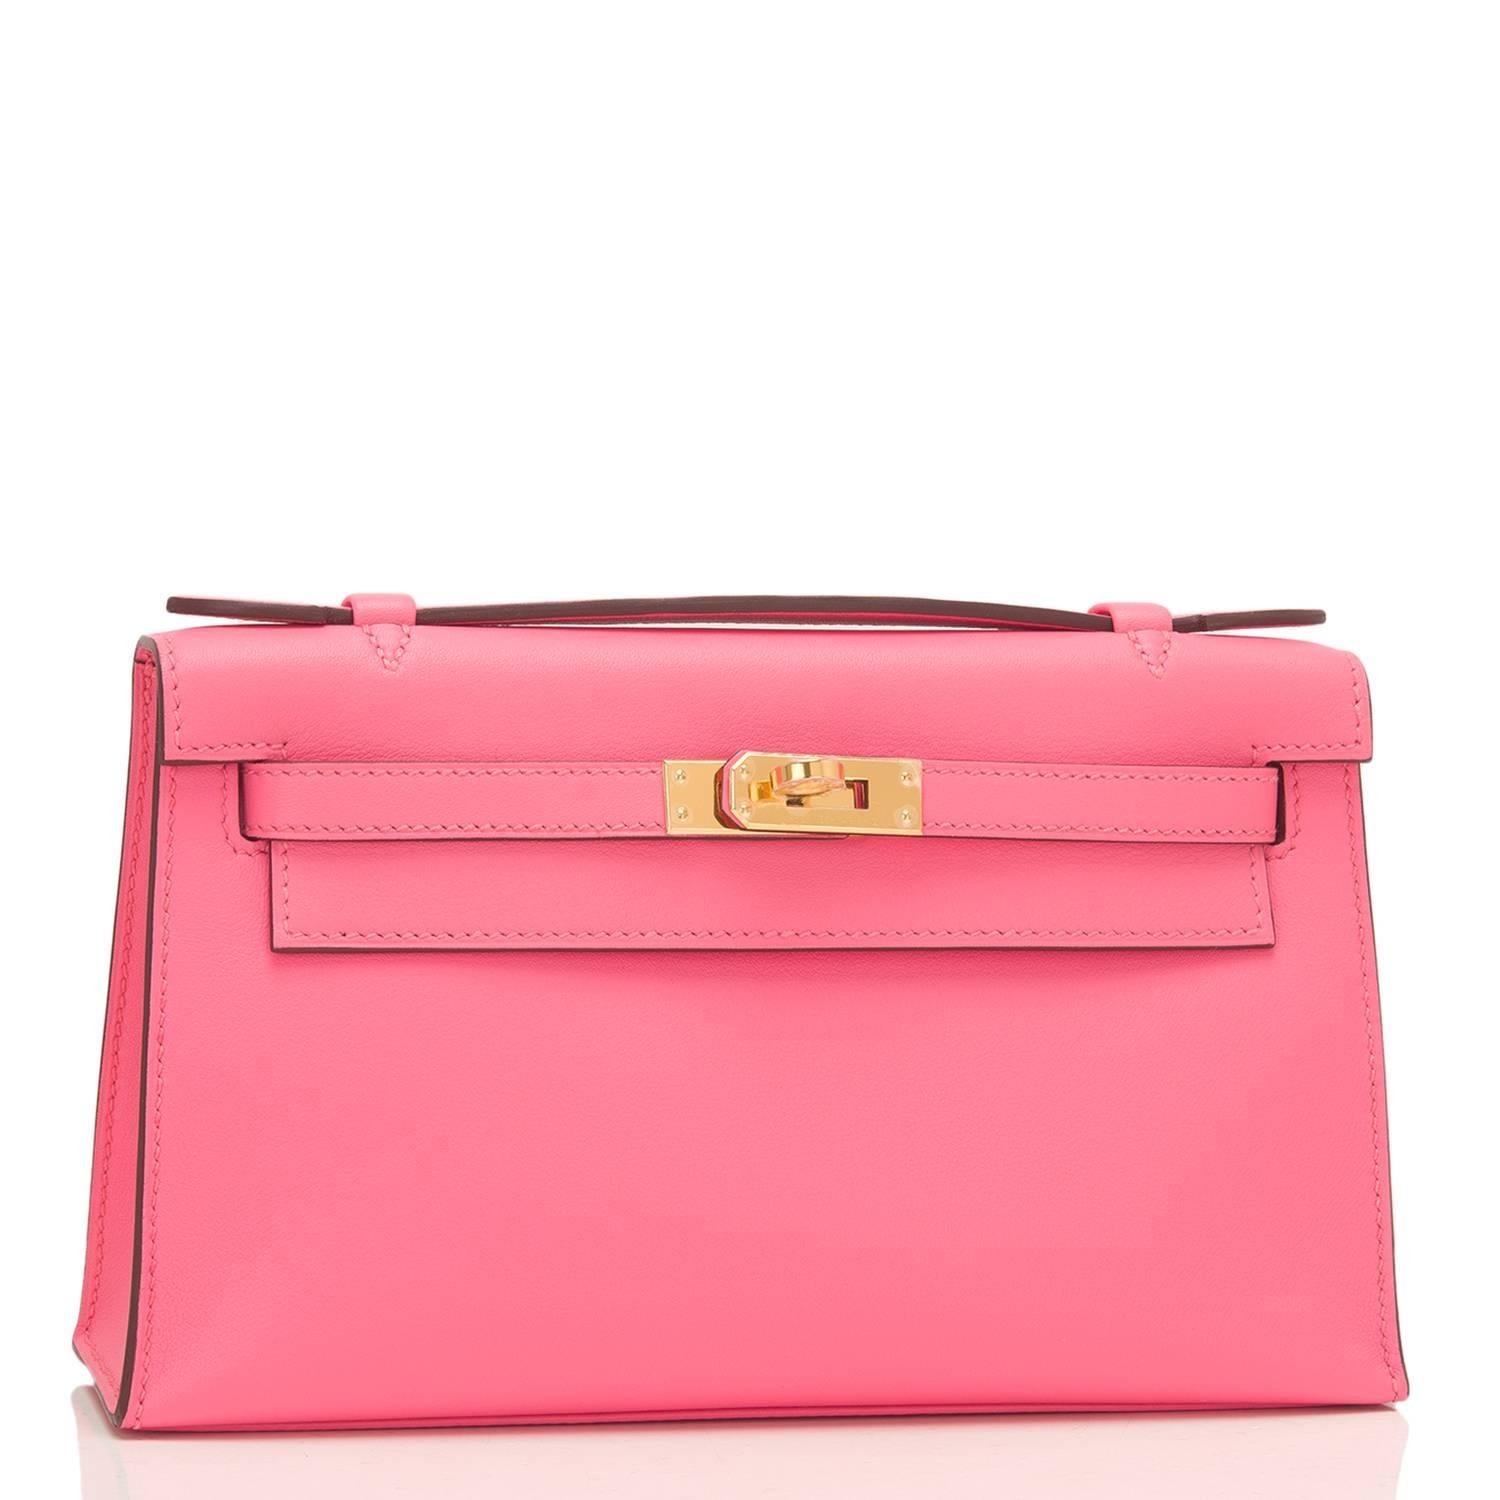 Hermes Rose Azalea (Azalee) Mini Kelly Pochette of swift leather with gold hardware.

This Hermes pochette has tonal stitching, a front flap with two straps, a toggle closure and a single flat handle.

The interior is lined with Rose Azalea chevre